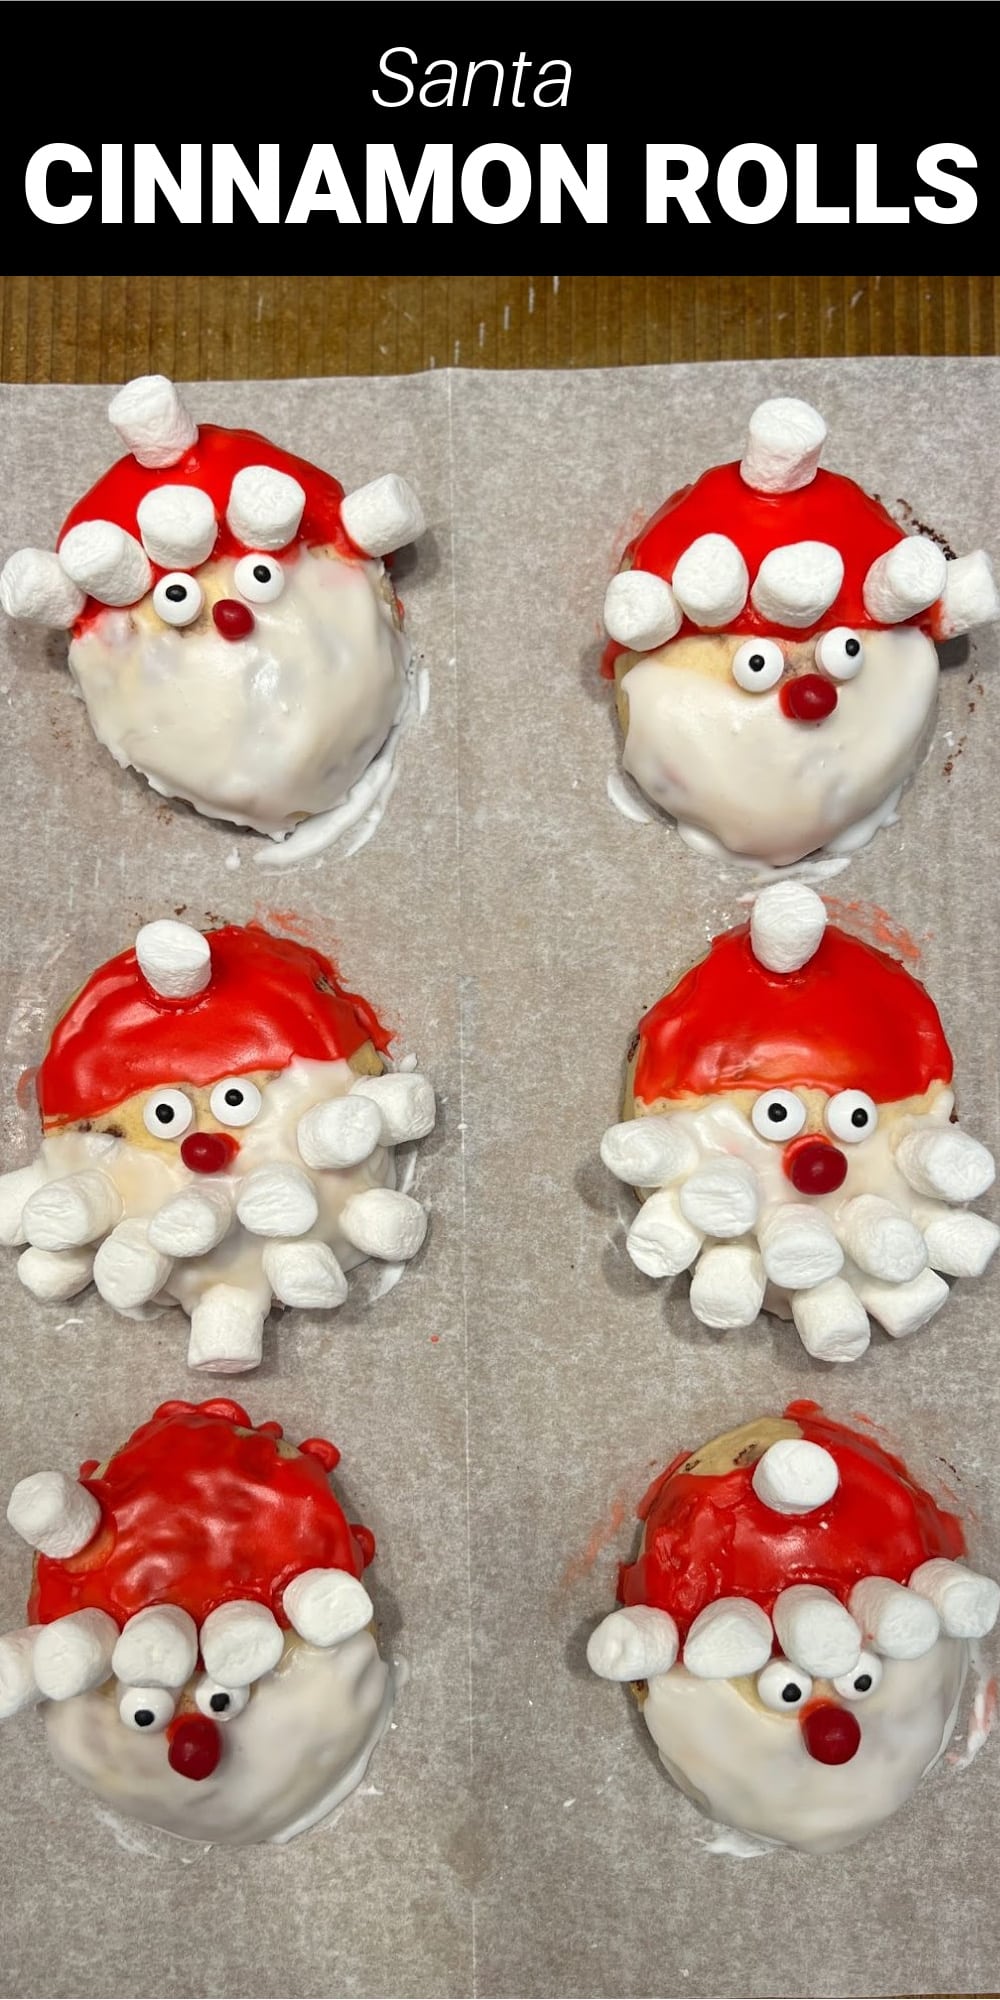 These Santa cinnamon rolls are a cute and festive breakfast that the whole family will love. Soft and warm cinnamon rolls with plenty of sweet and creamy icing are decorated to look like adorable Santa faces. From the red frosting hat to the candy eyes to the mini marshmallow beards, these sweet treats are sure to make everyone smile!